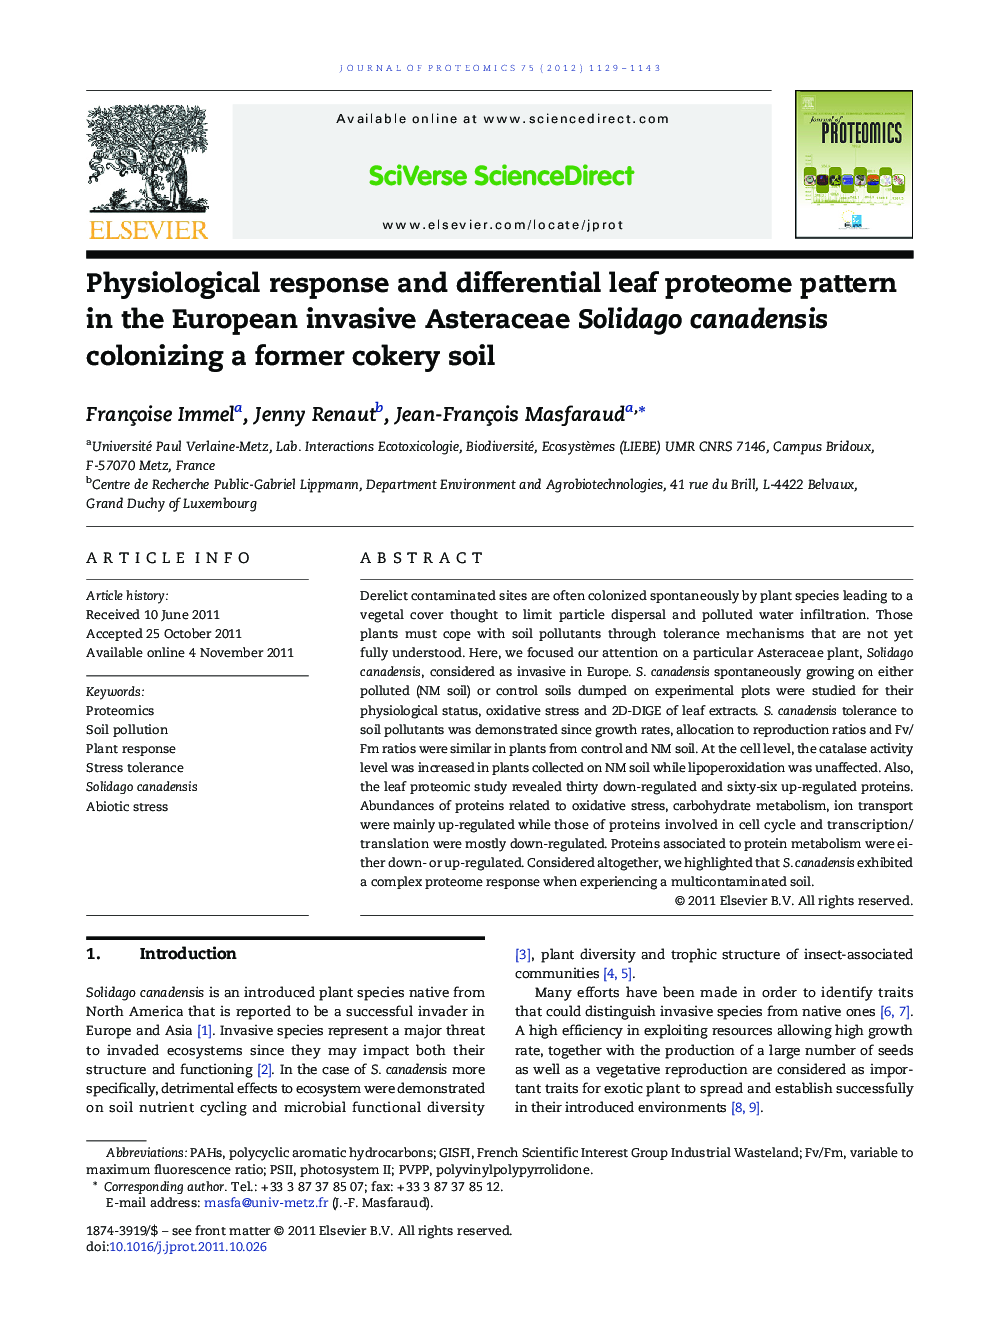 Physiological response and differential leaf proteome pattern in the European invasive Asteraceae Solidago canadensis colonizing a former cokery soil